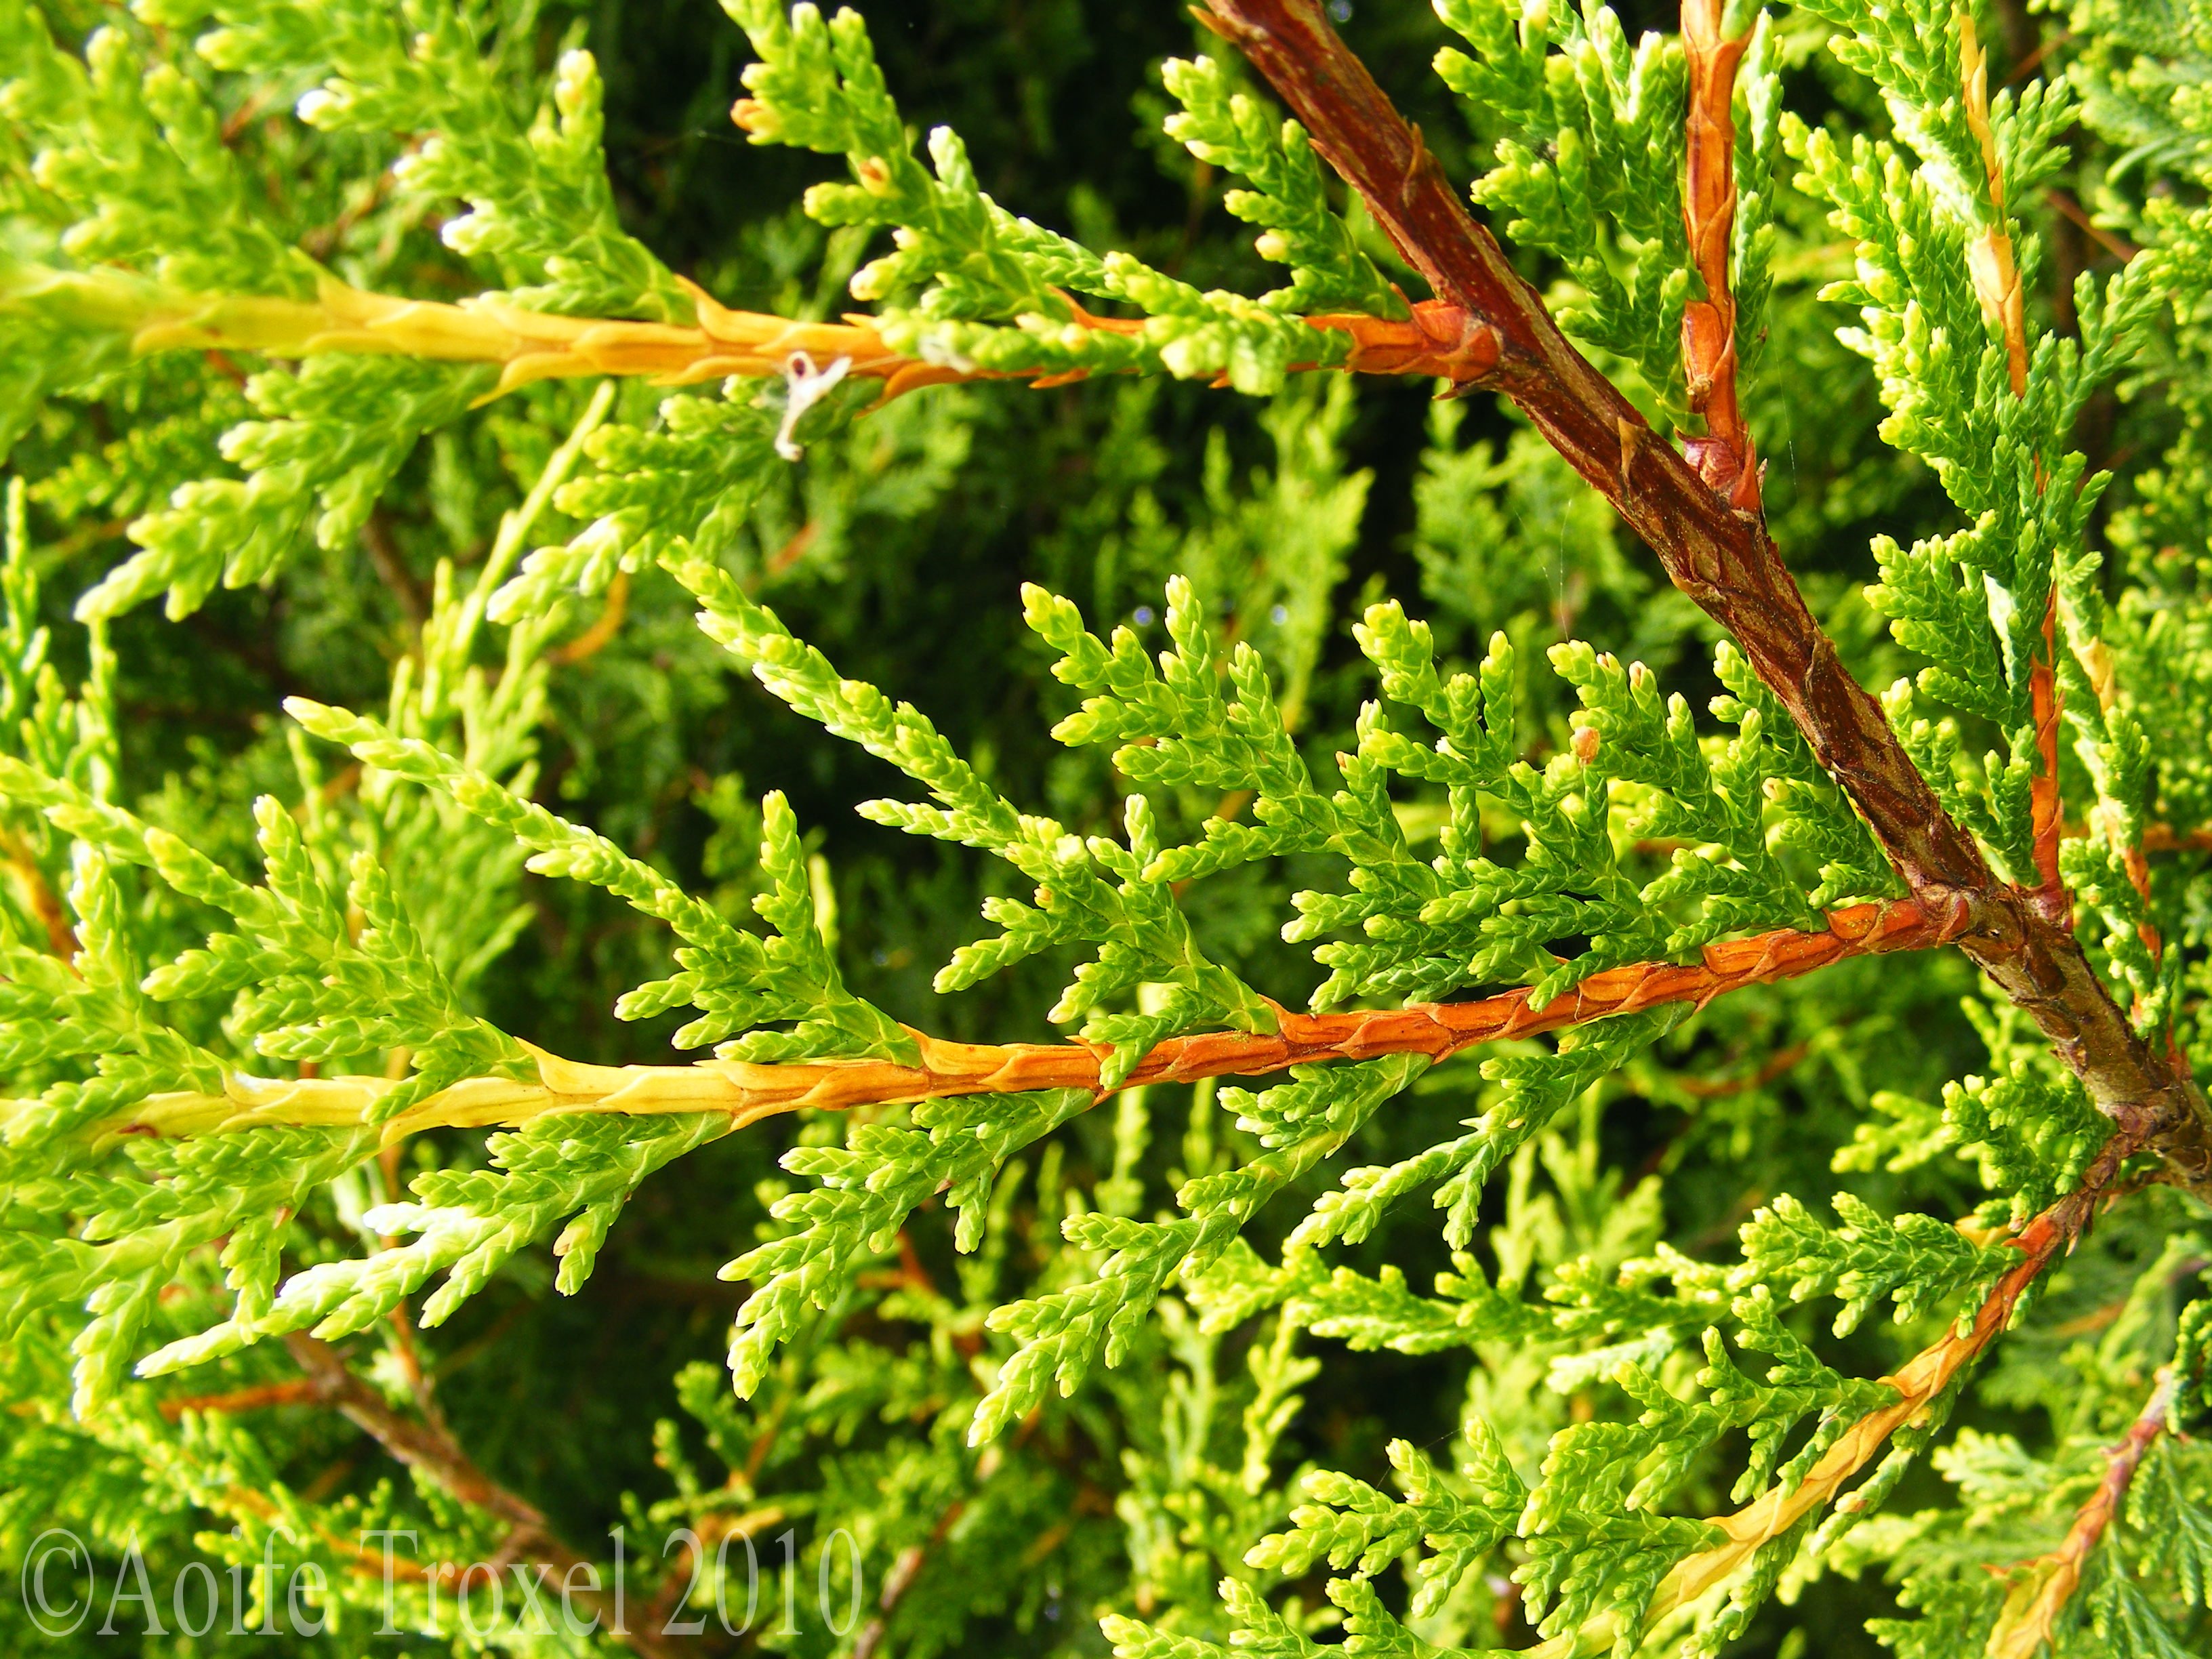 Pine Tree Close-Up | Aoifetroxel's Blog